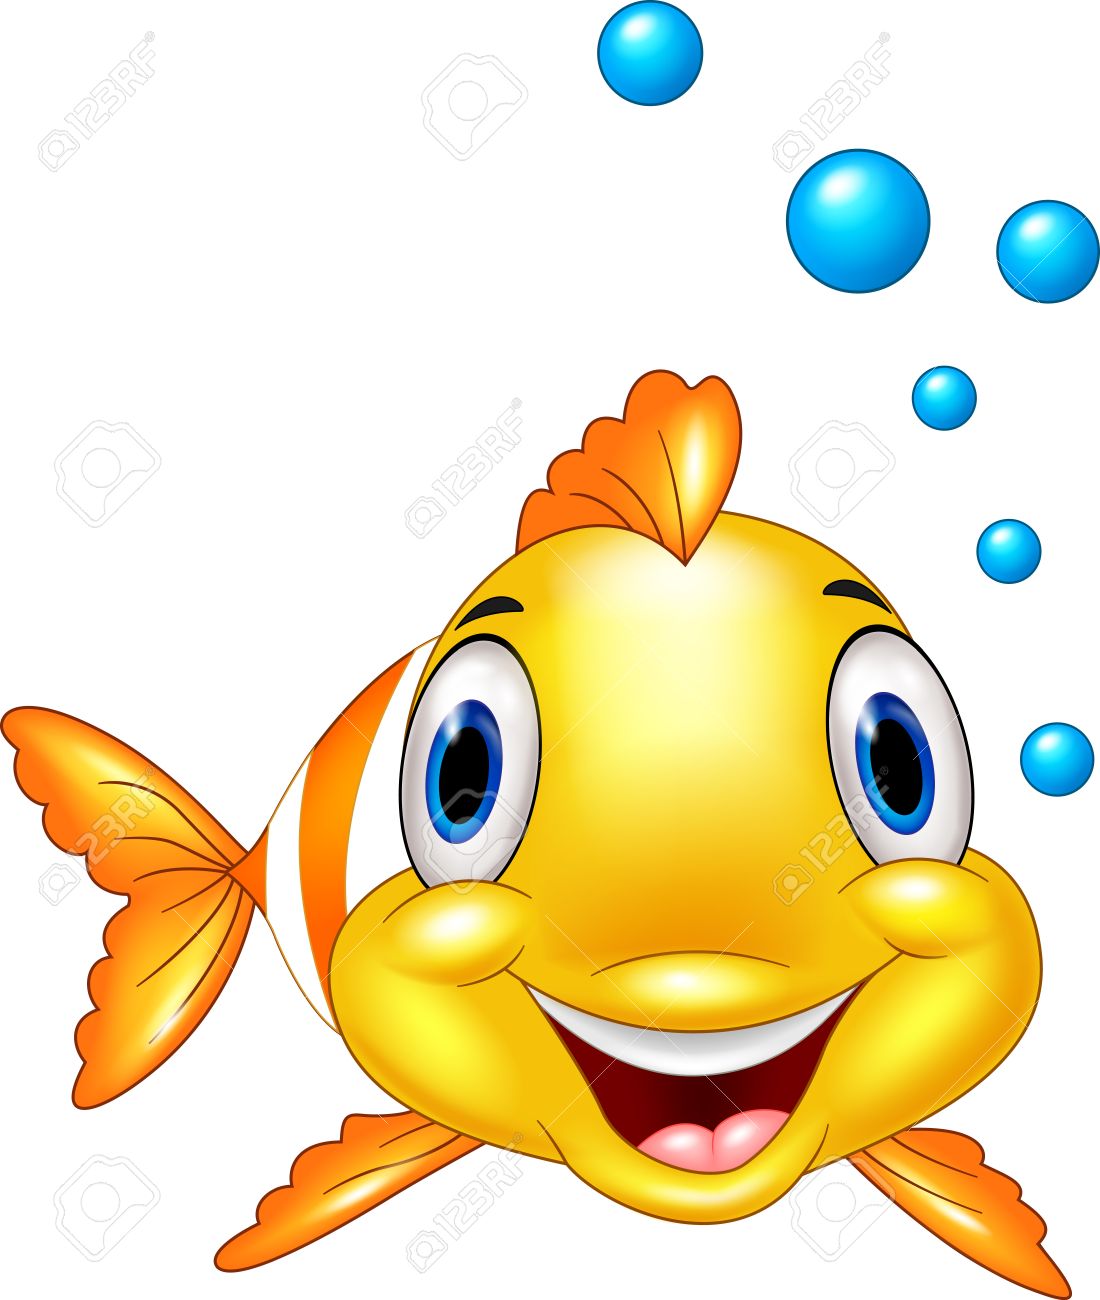 Bubbles clipart fish. With group adorable clown